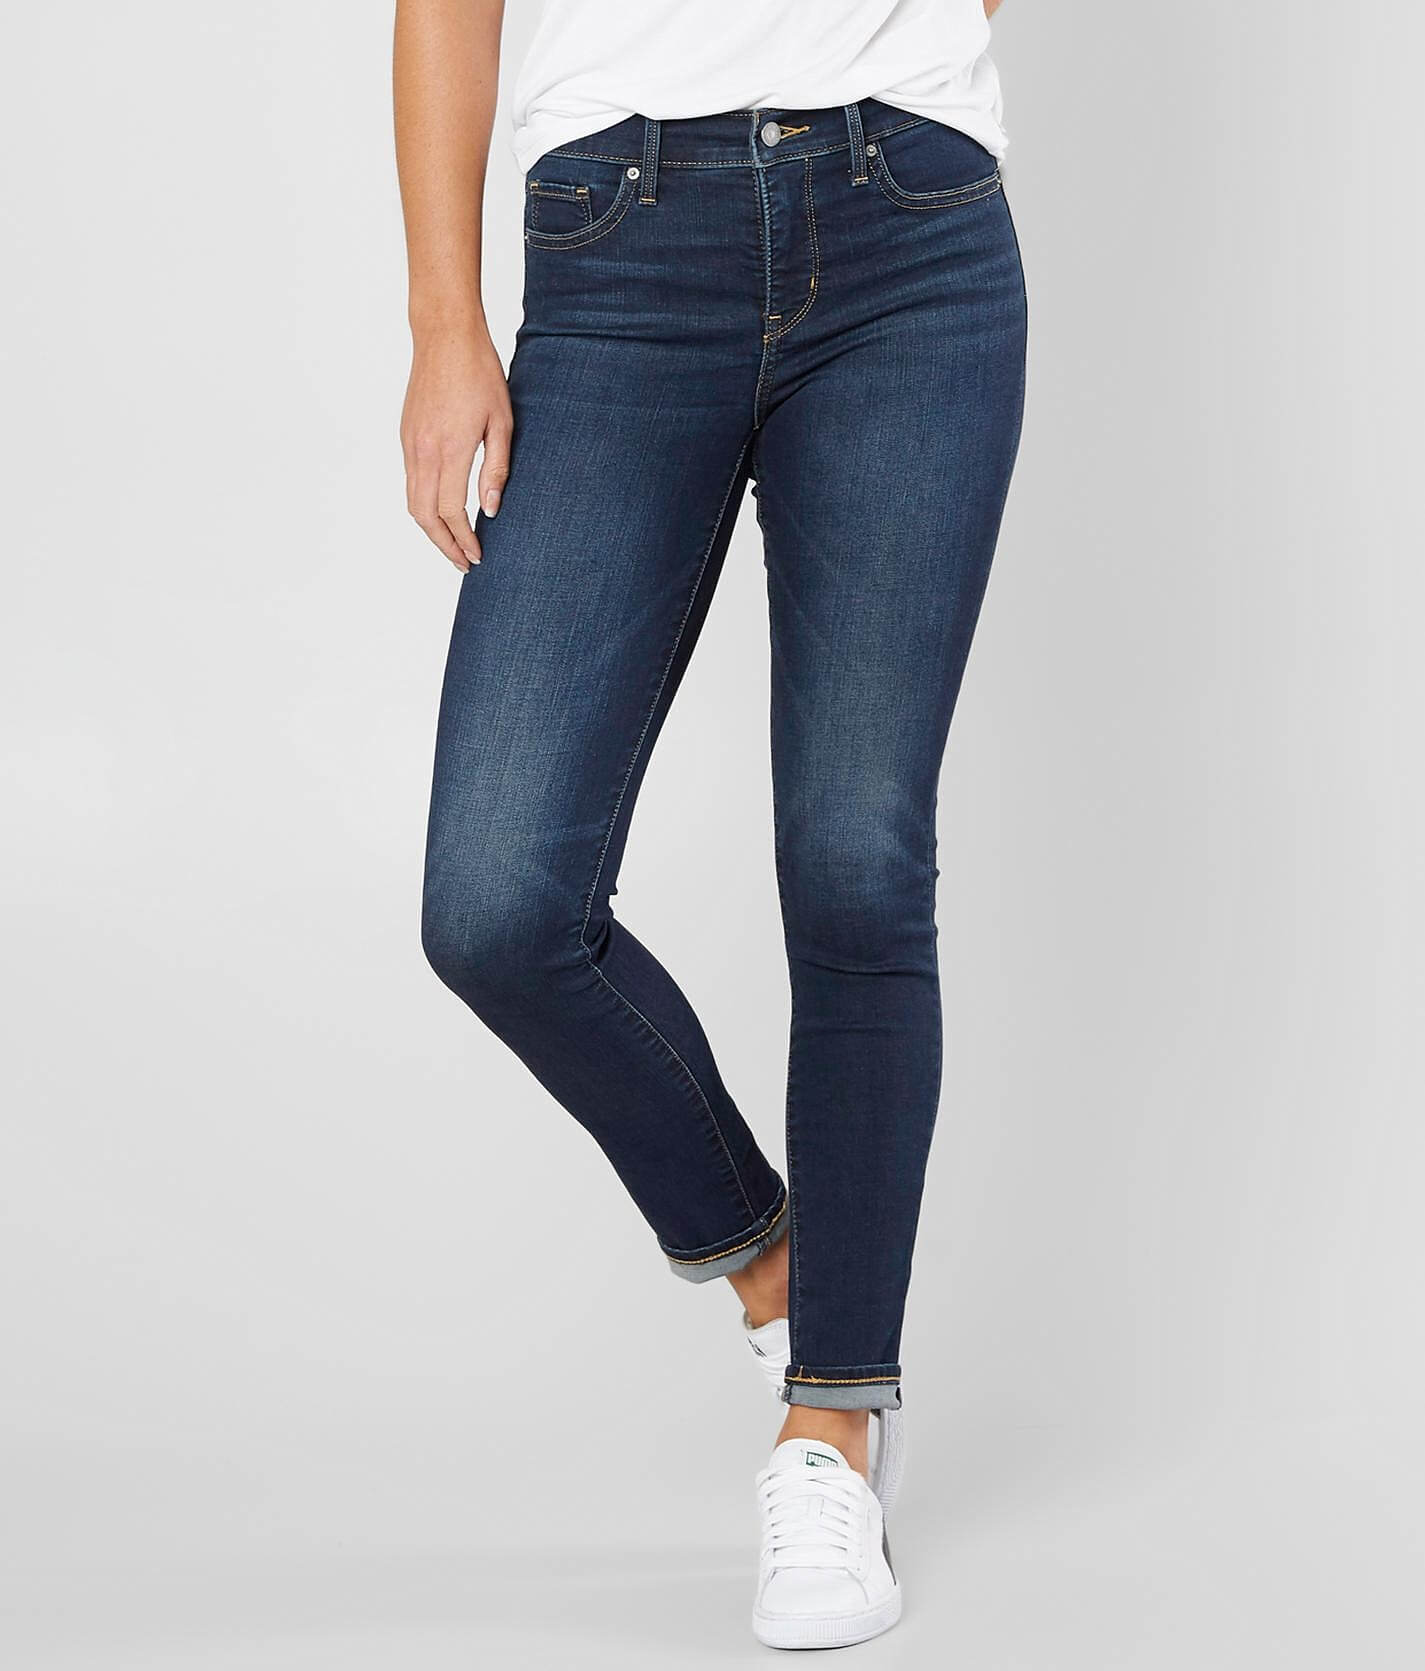 levi's 311 shaping skinny reviews